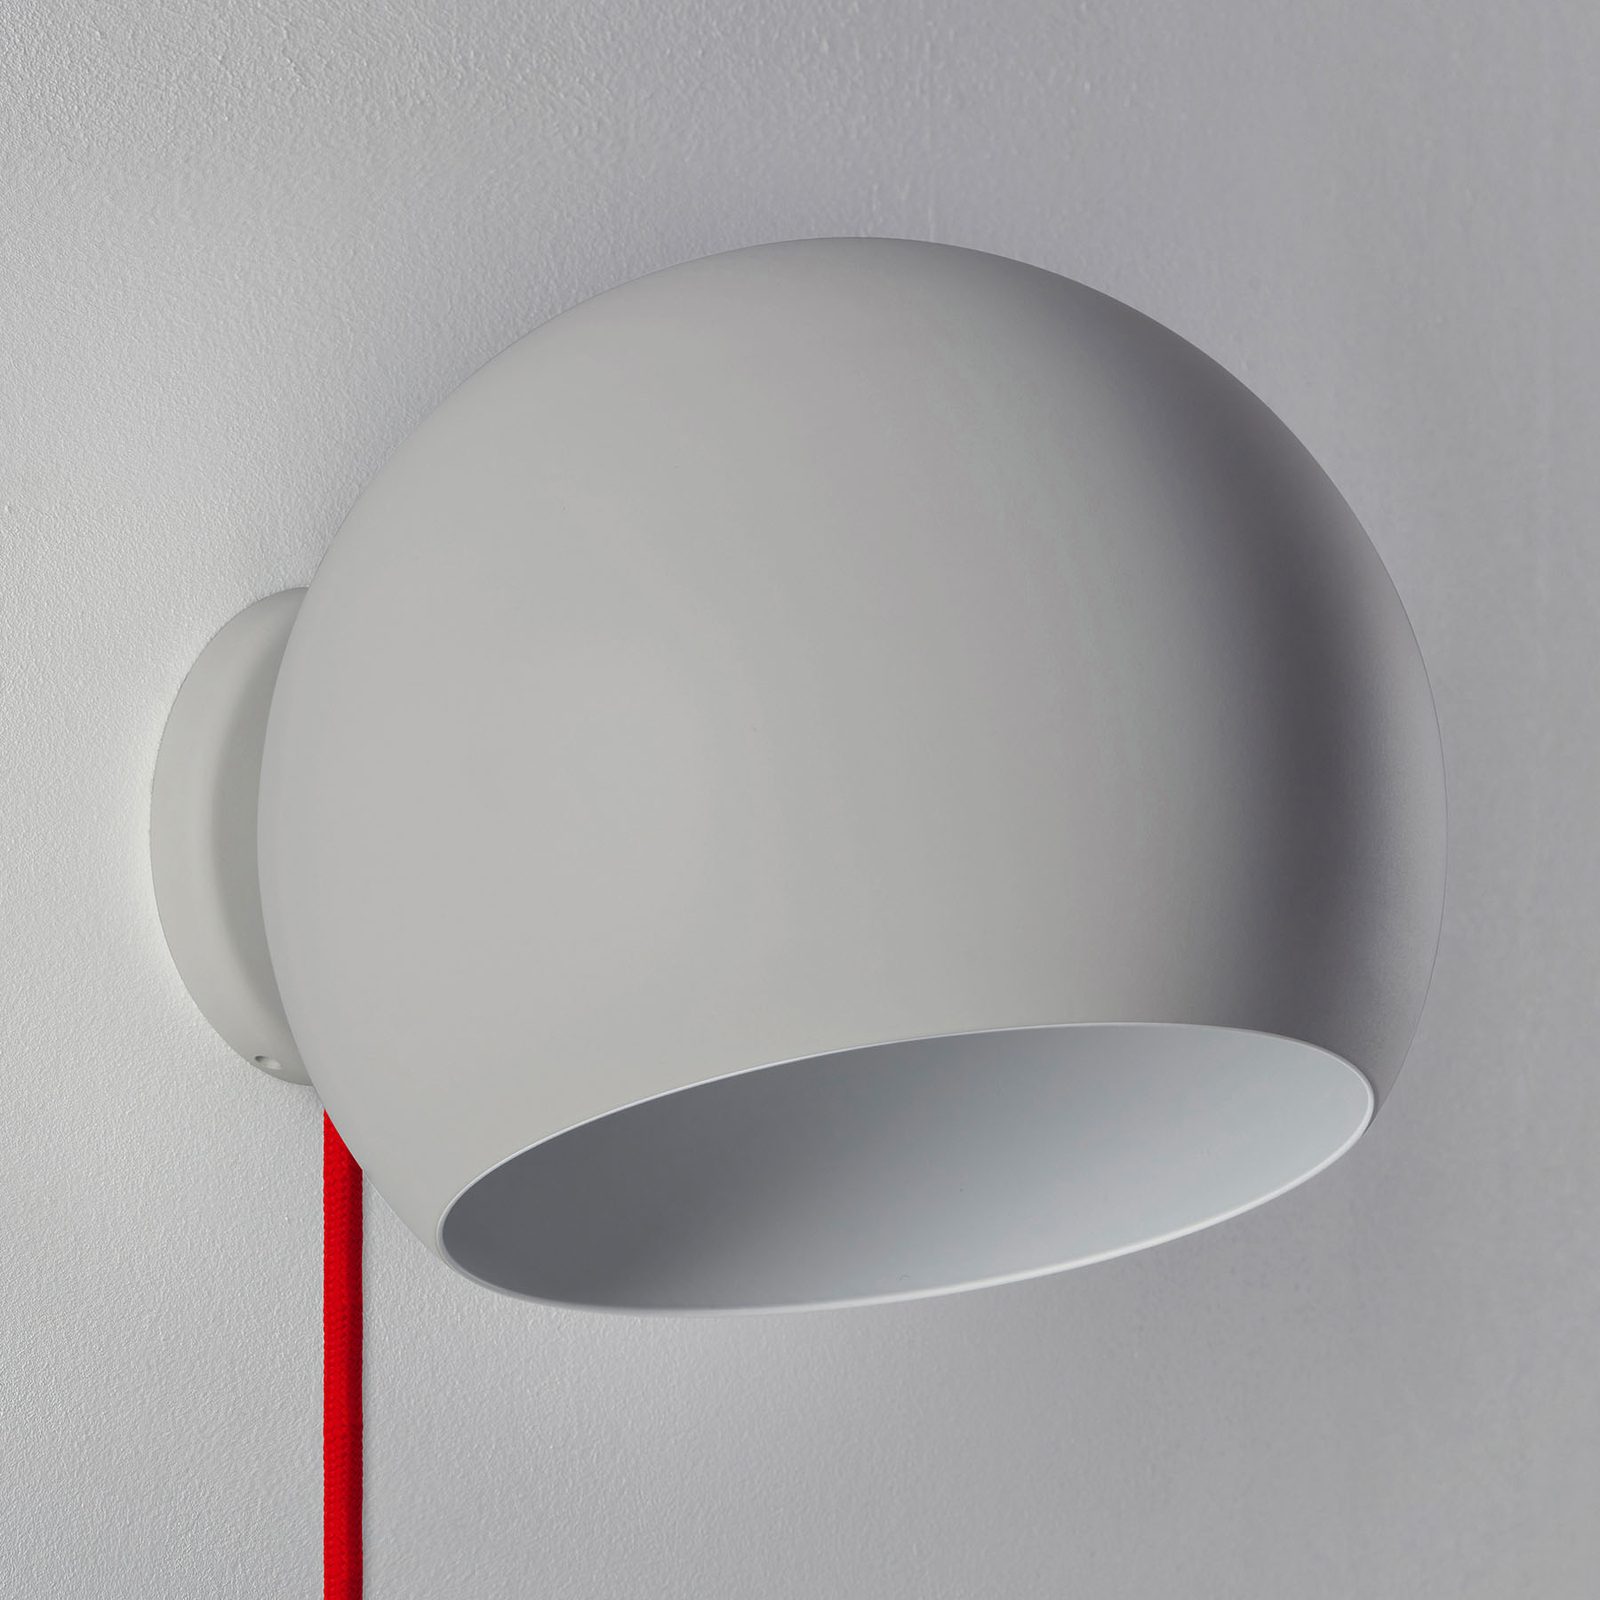 Nyta Tilt Globe Wall Short, red cable, grey